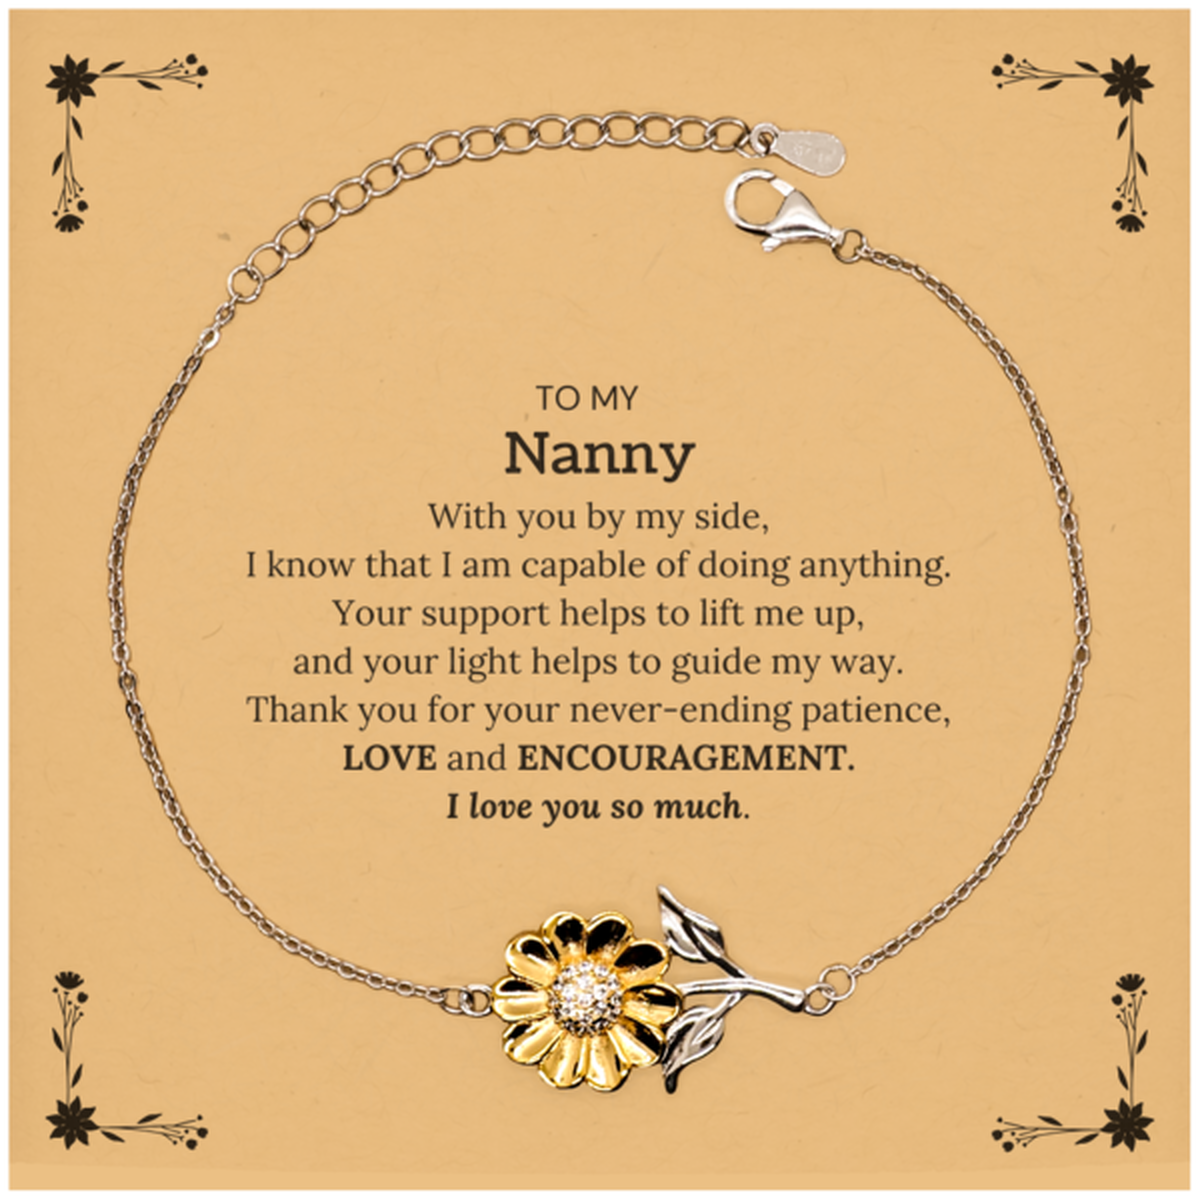 Appreciation Nanny Sunflower Bracelet Gifts, To My Nanny Birthday Christmas Wedding Keepsake Gifts for Nanny With you by my side, I know that I am capable of doing anything. I love you so much